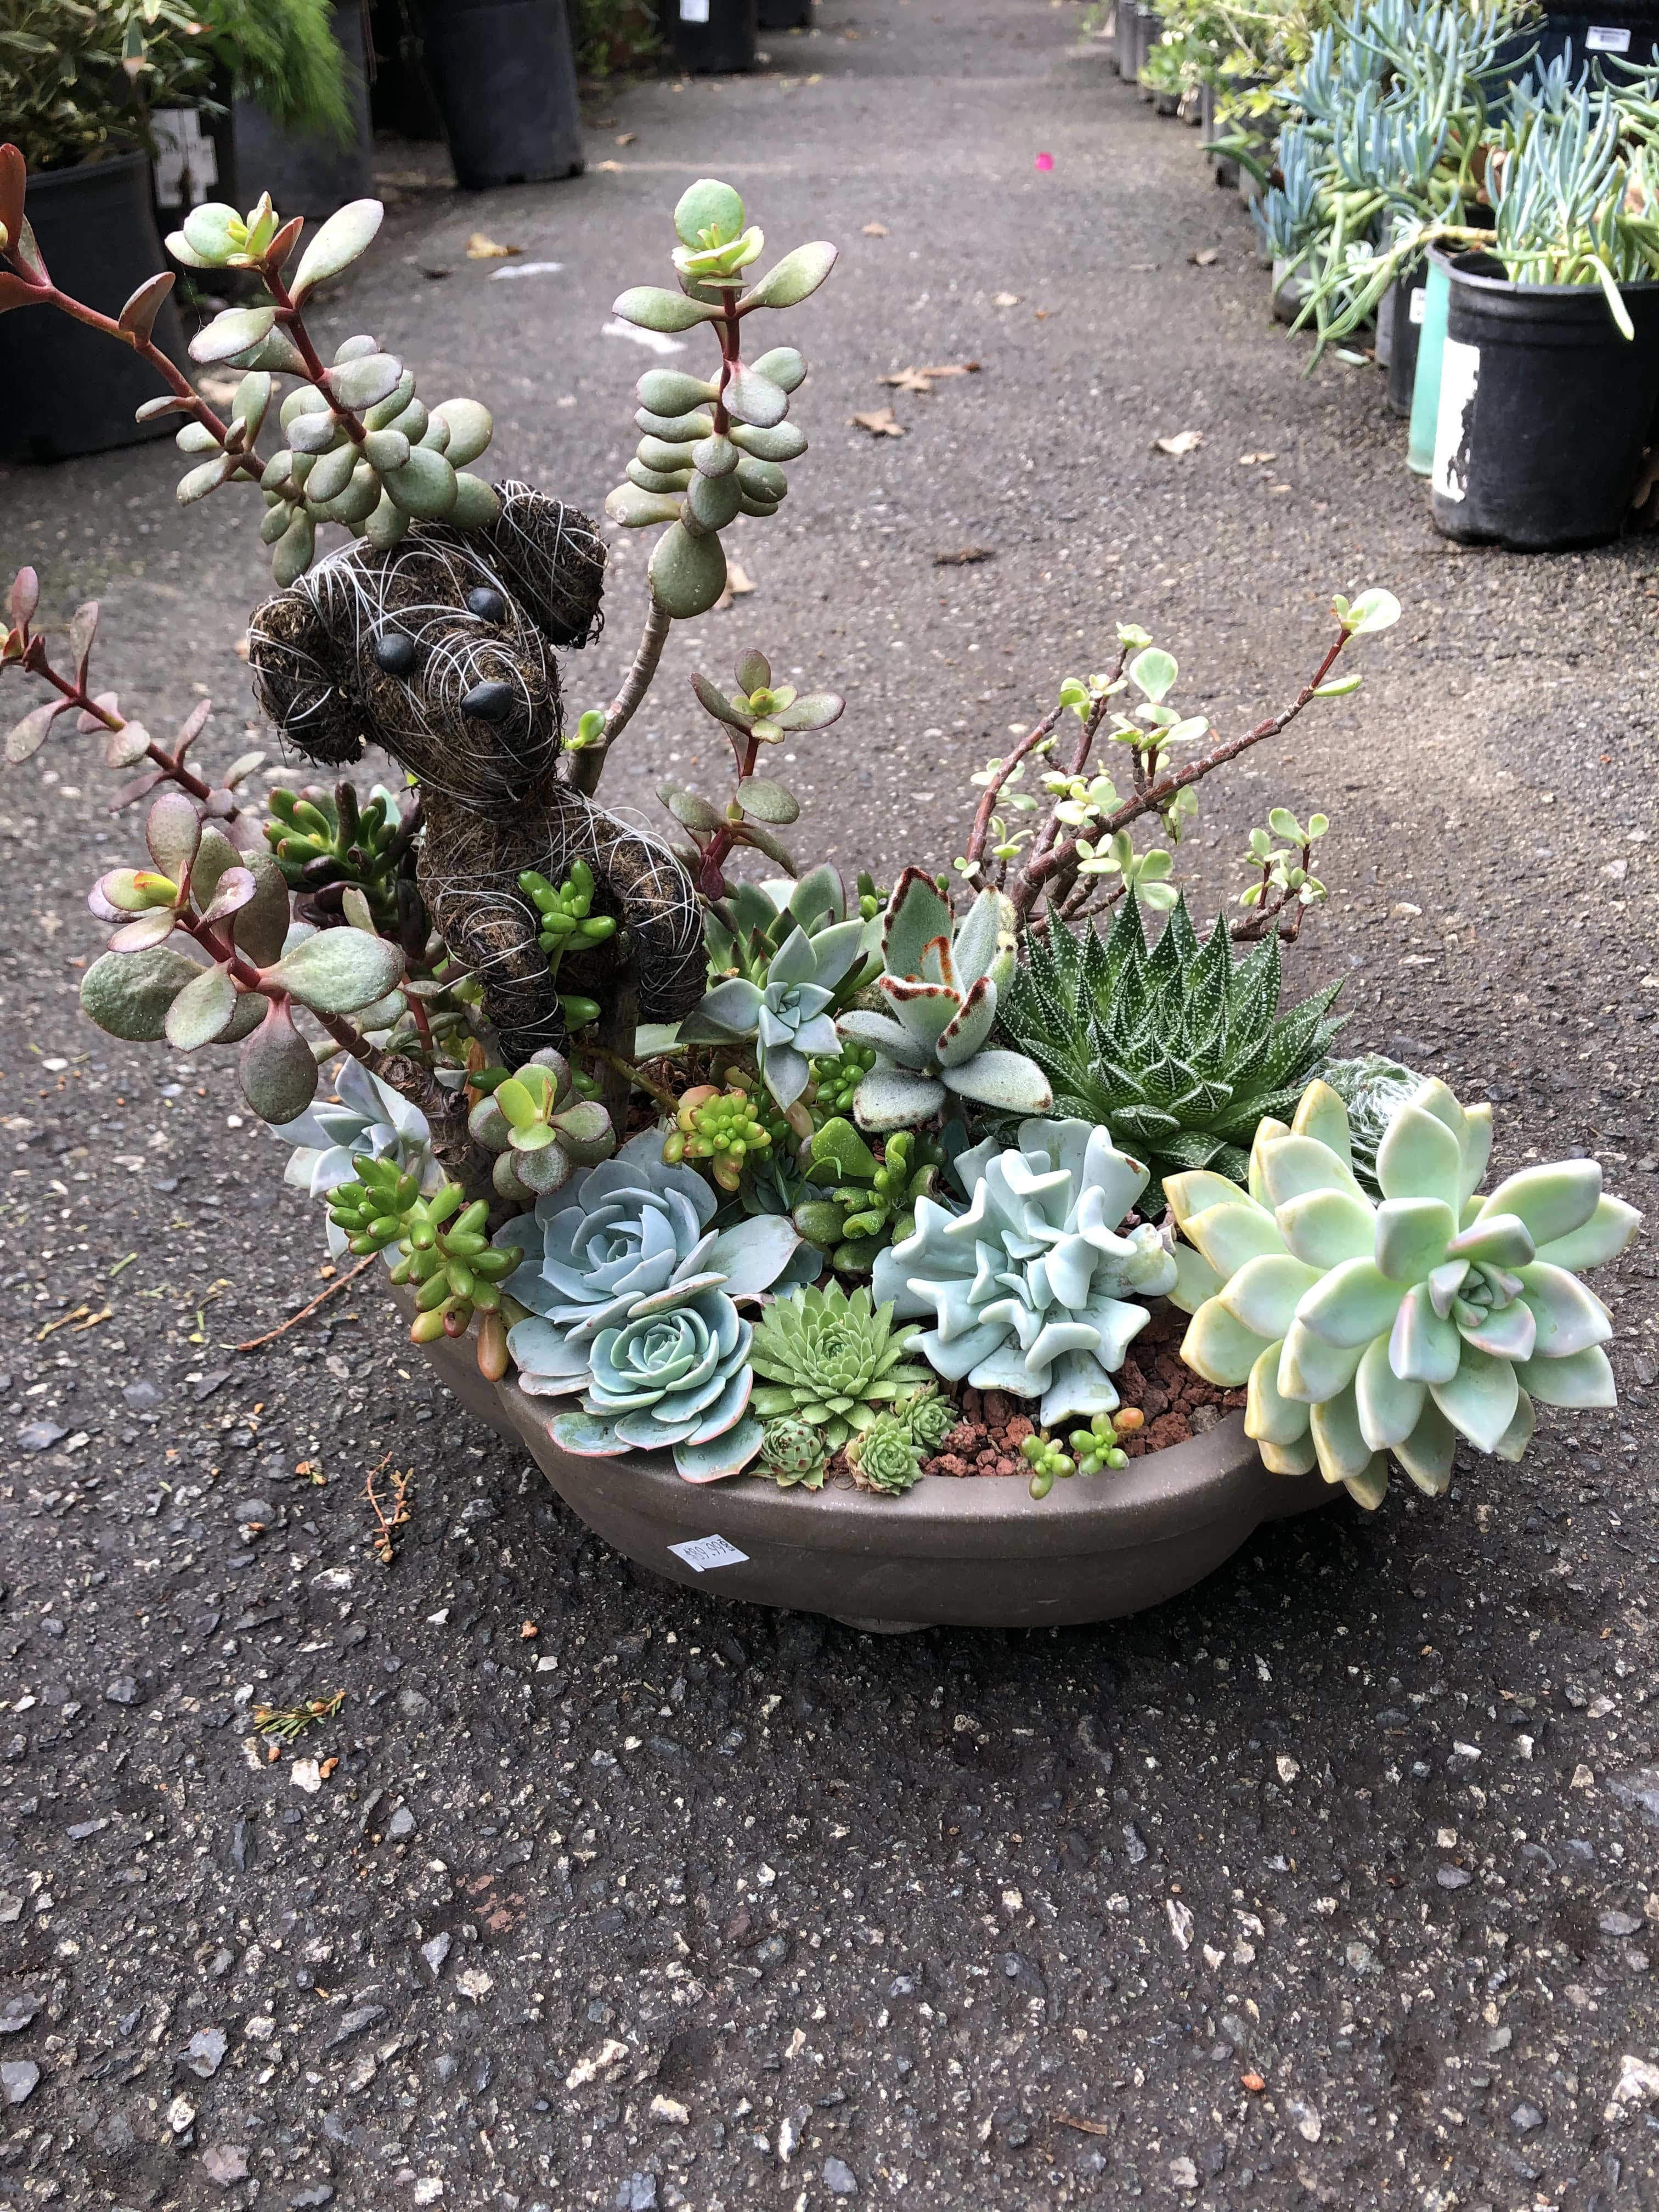 Dog &amp; Succulents arrangement  - Place in bright indirect light. Spray to water. 14&quot; height 13.5&quot; width